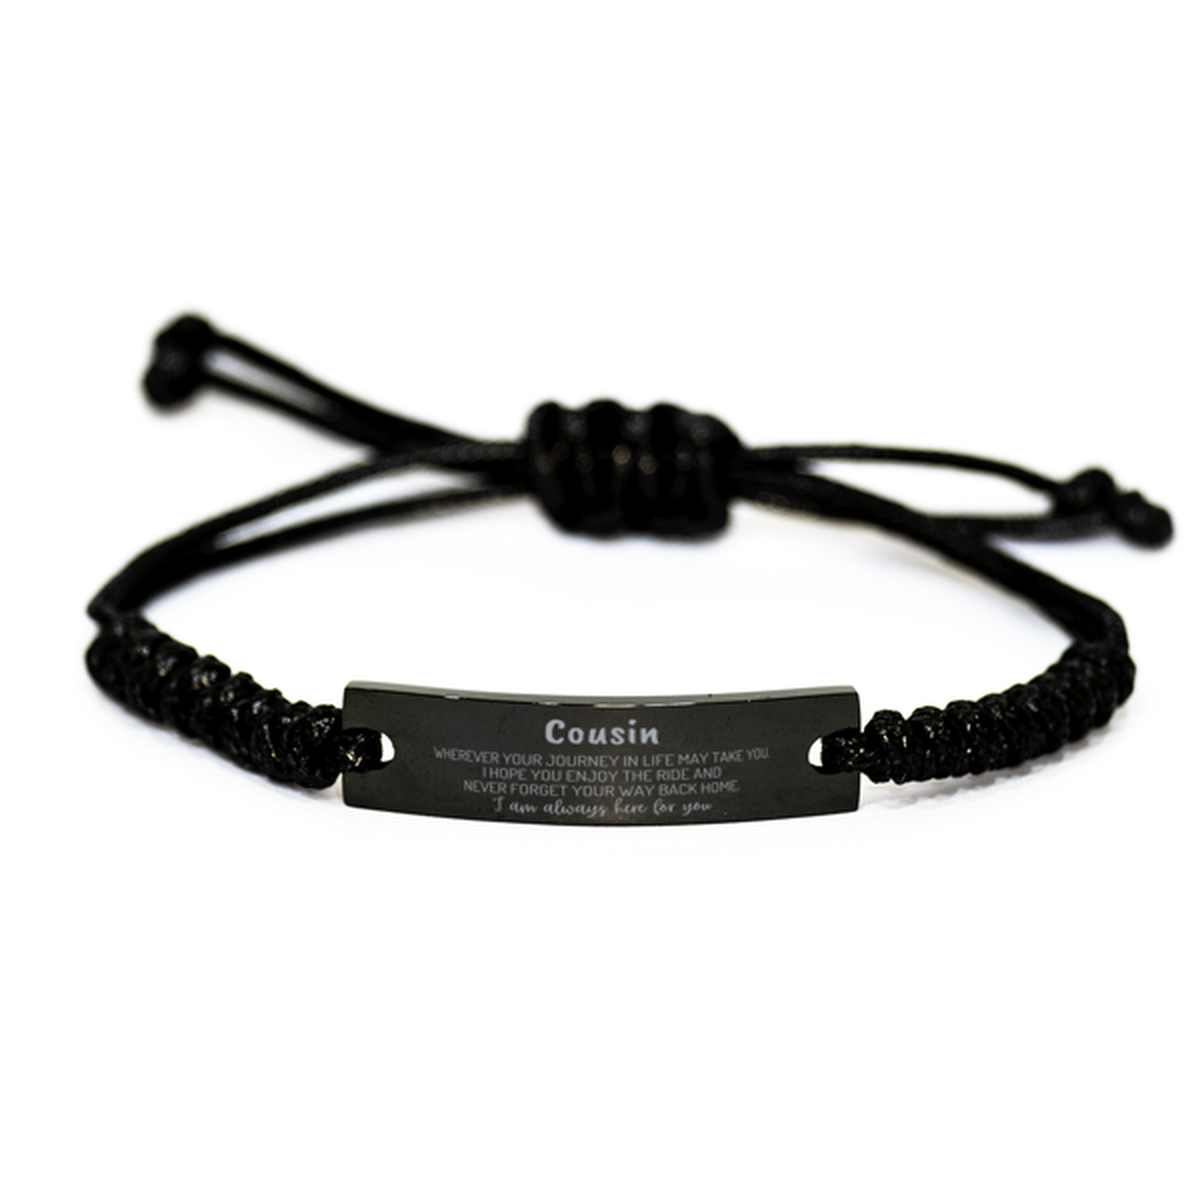 Cousin wherever your journey in life may take you, I am always here for you Cousin Black Rope Bracelet, Awesome Christmas Gifts For Cousin, Cousin Birthday Gifts for Men Women Family Loved One